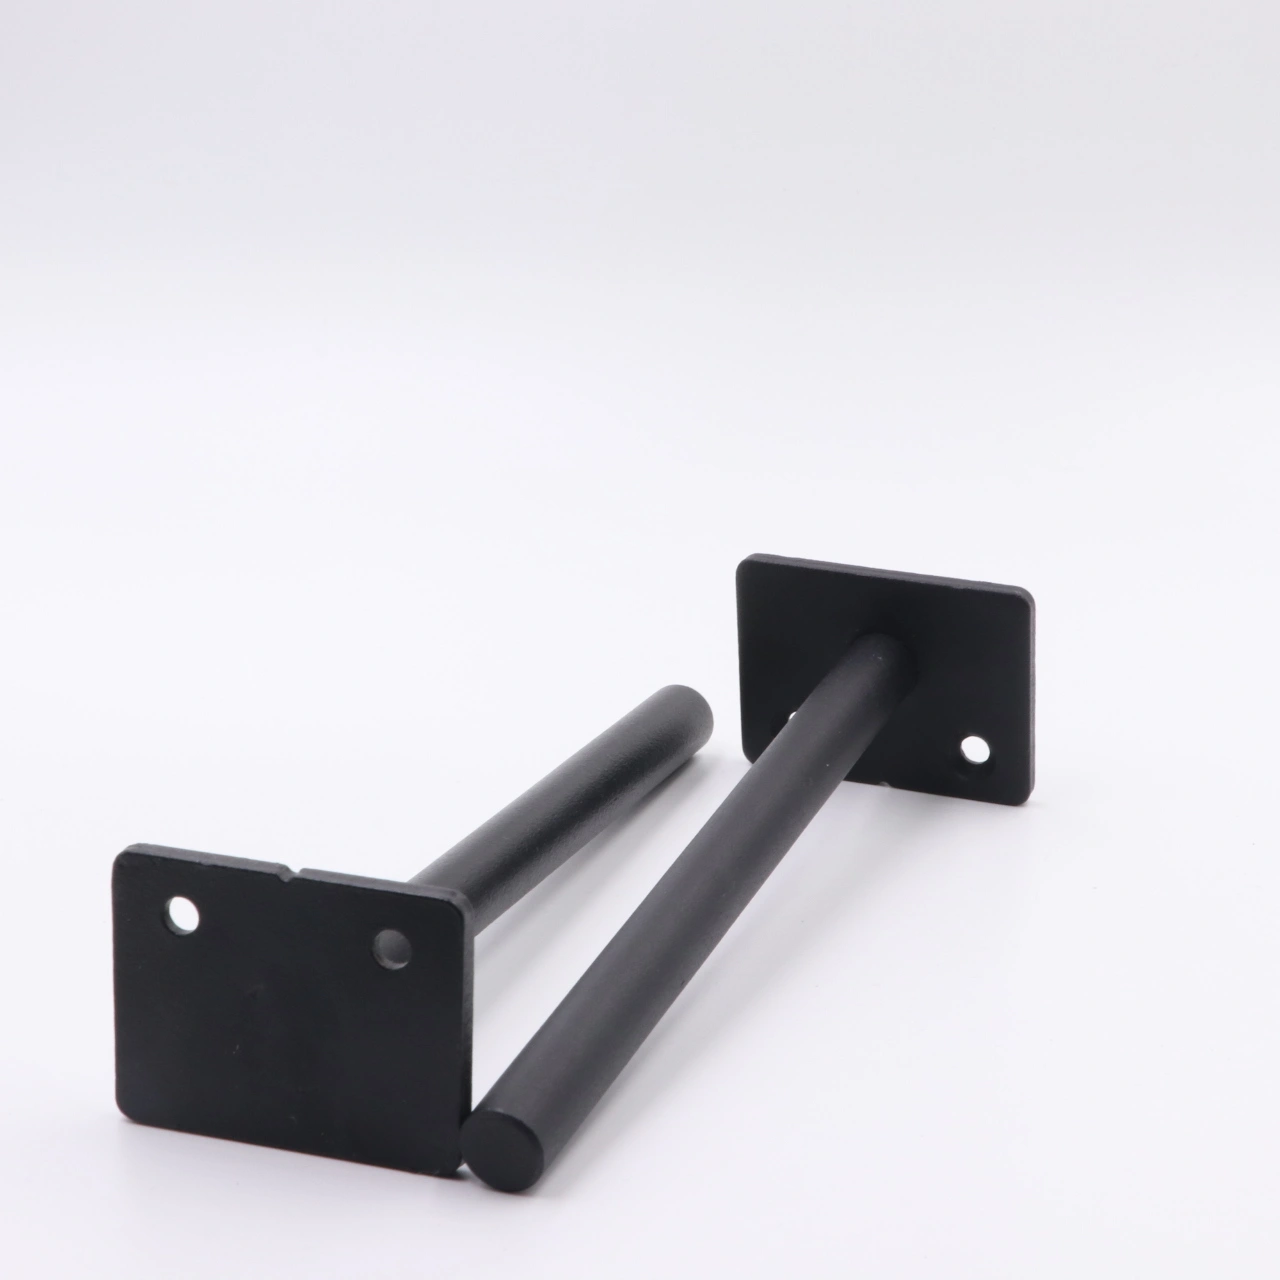 Heavy Duty Floating Wall Shelf Invisible Brackets - Buy supports d'étagère invisibles, supports invisibles pour étagères flottantes, supports invisibles pour étagère flottante Product on Surealong